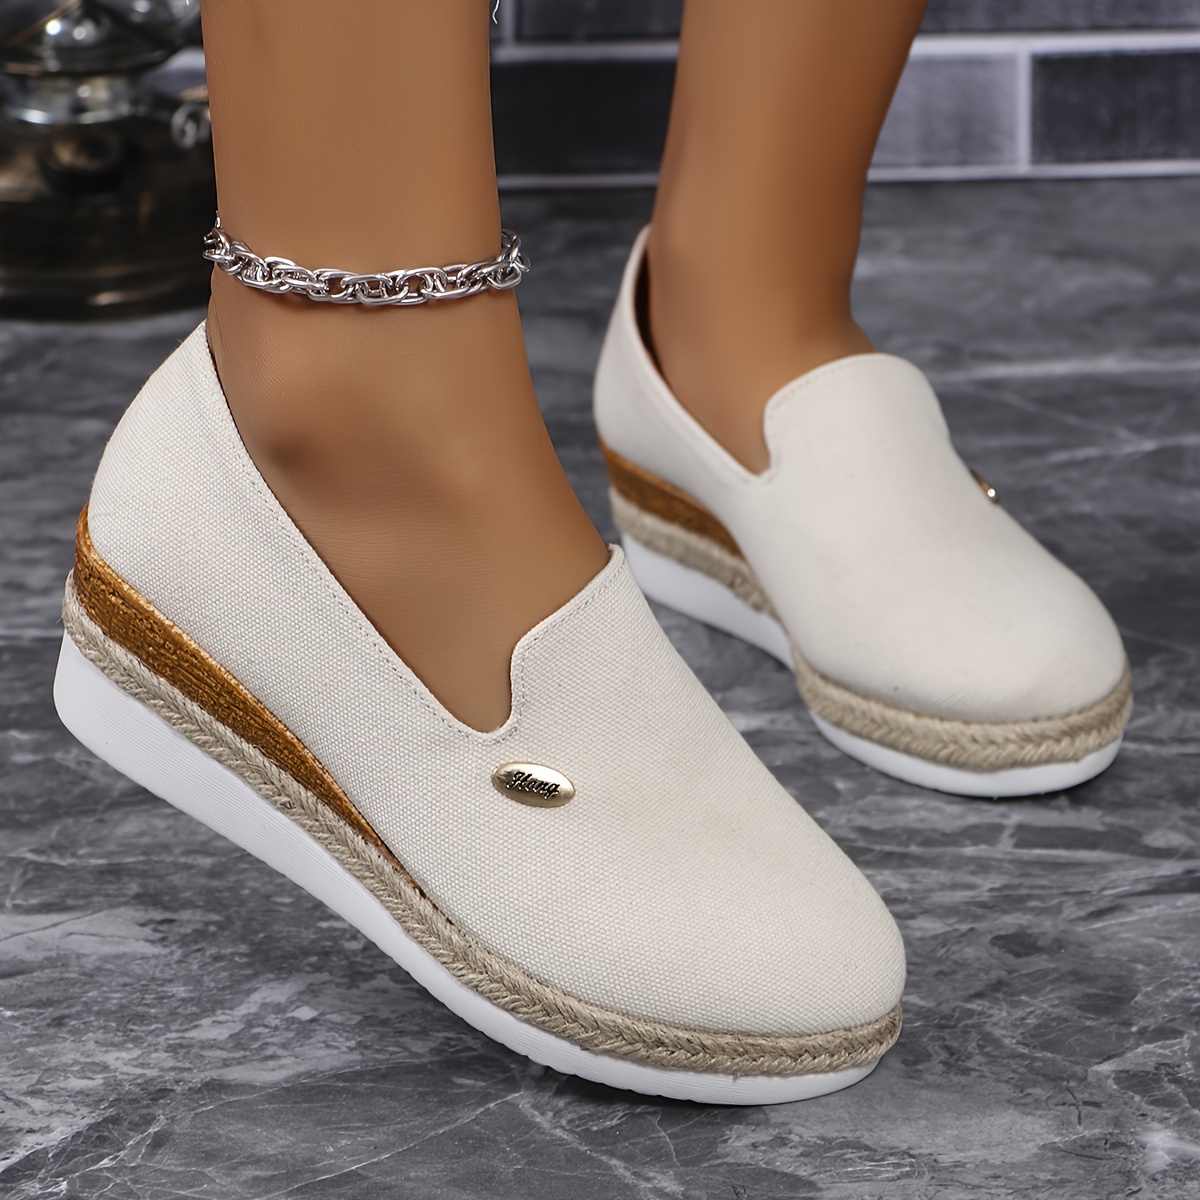 

Women's Wedge Heeled Shoes, Casual Slip On Platform Shoes, Women's Comfortable Shoes